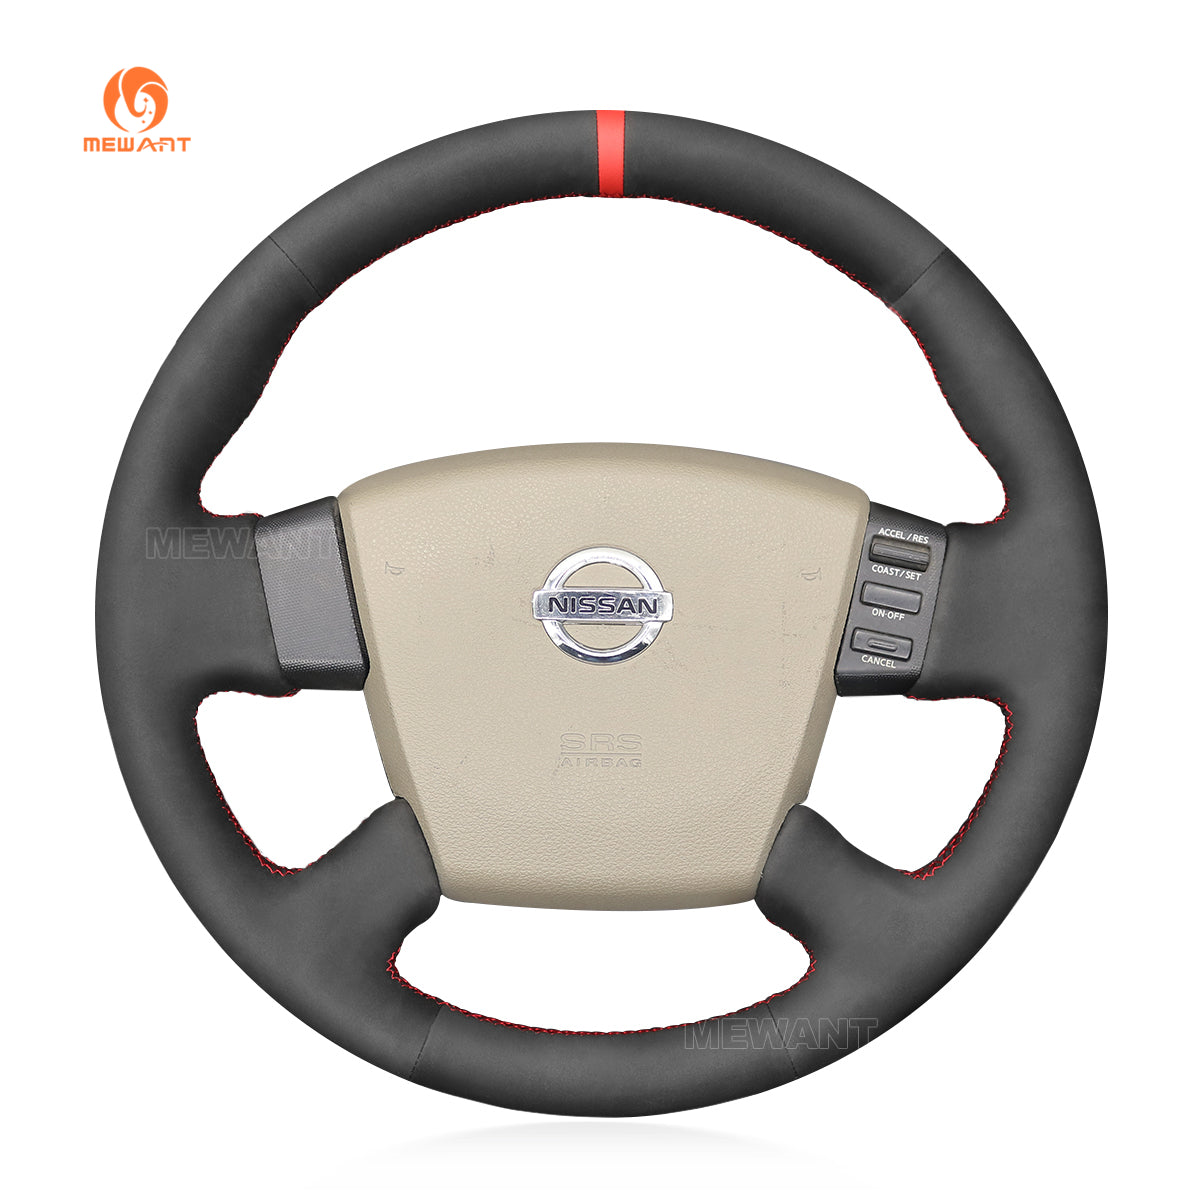 MEWANT Hand Stitch Leather Suede Car Steering Wheel Cover for Nissan Teana Cefiro for Renault Samsung